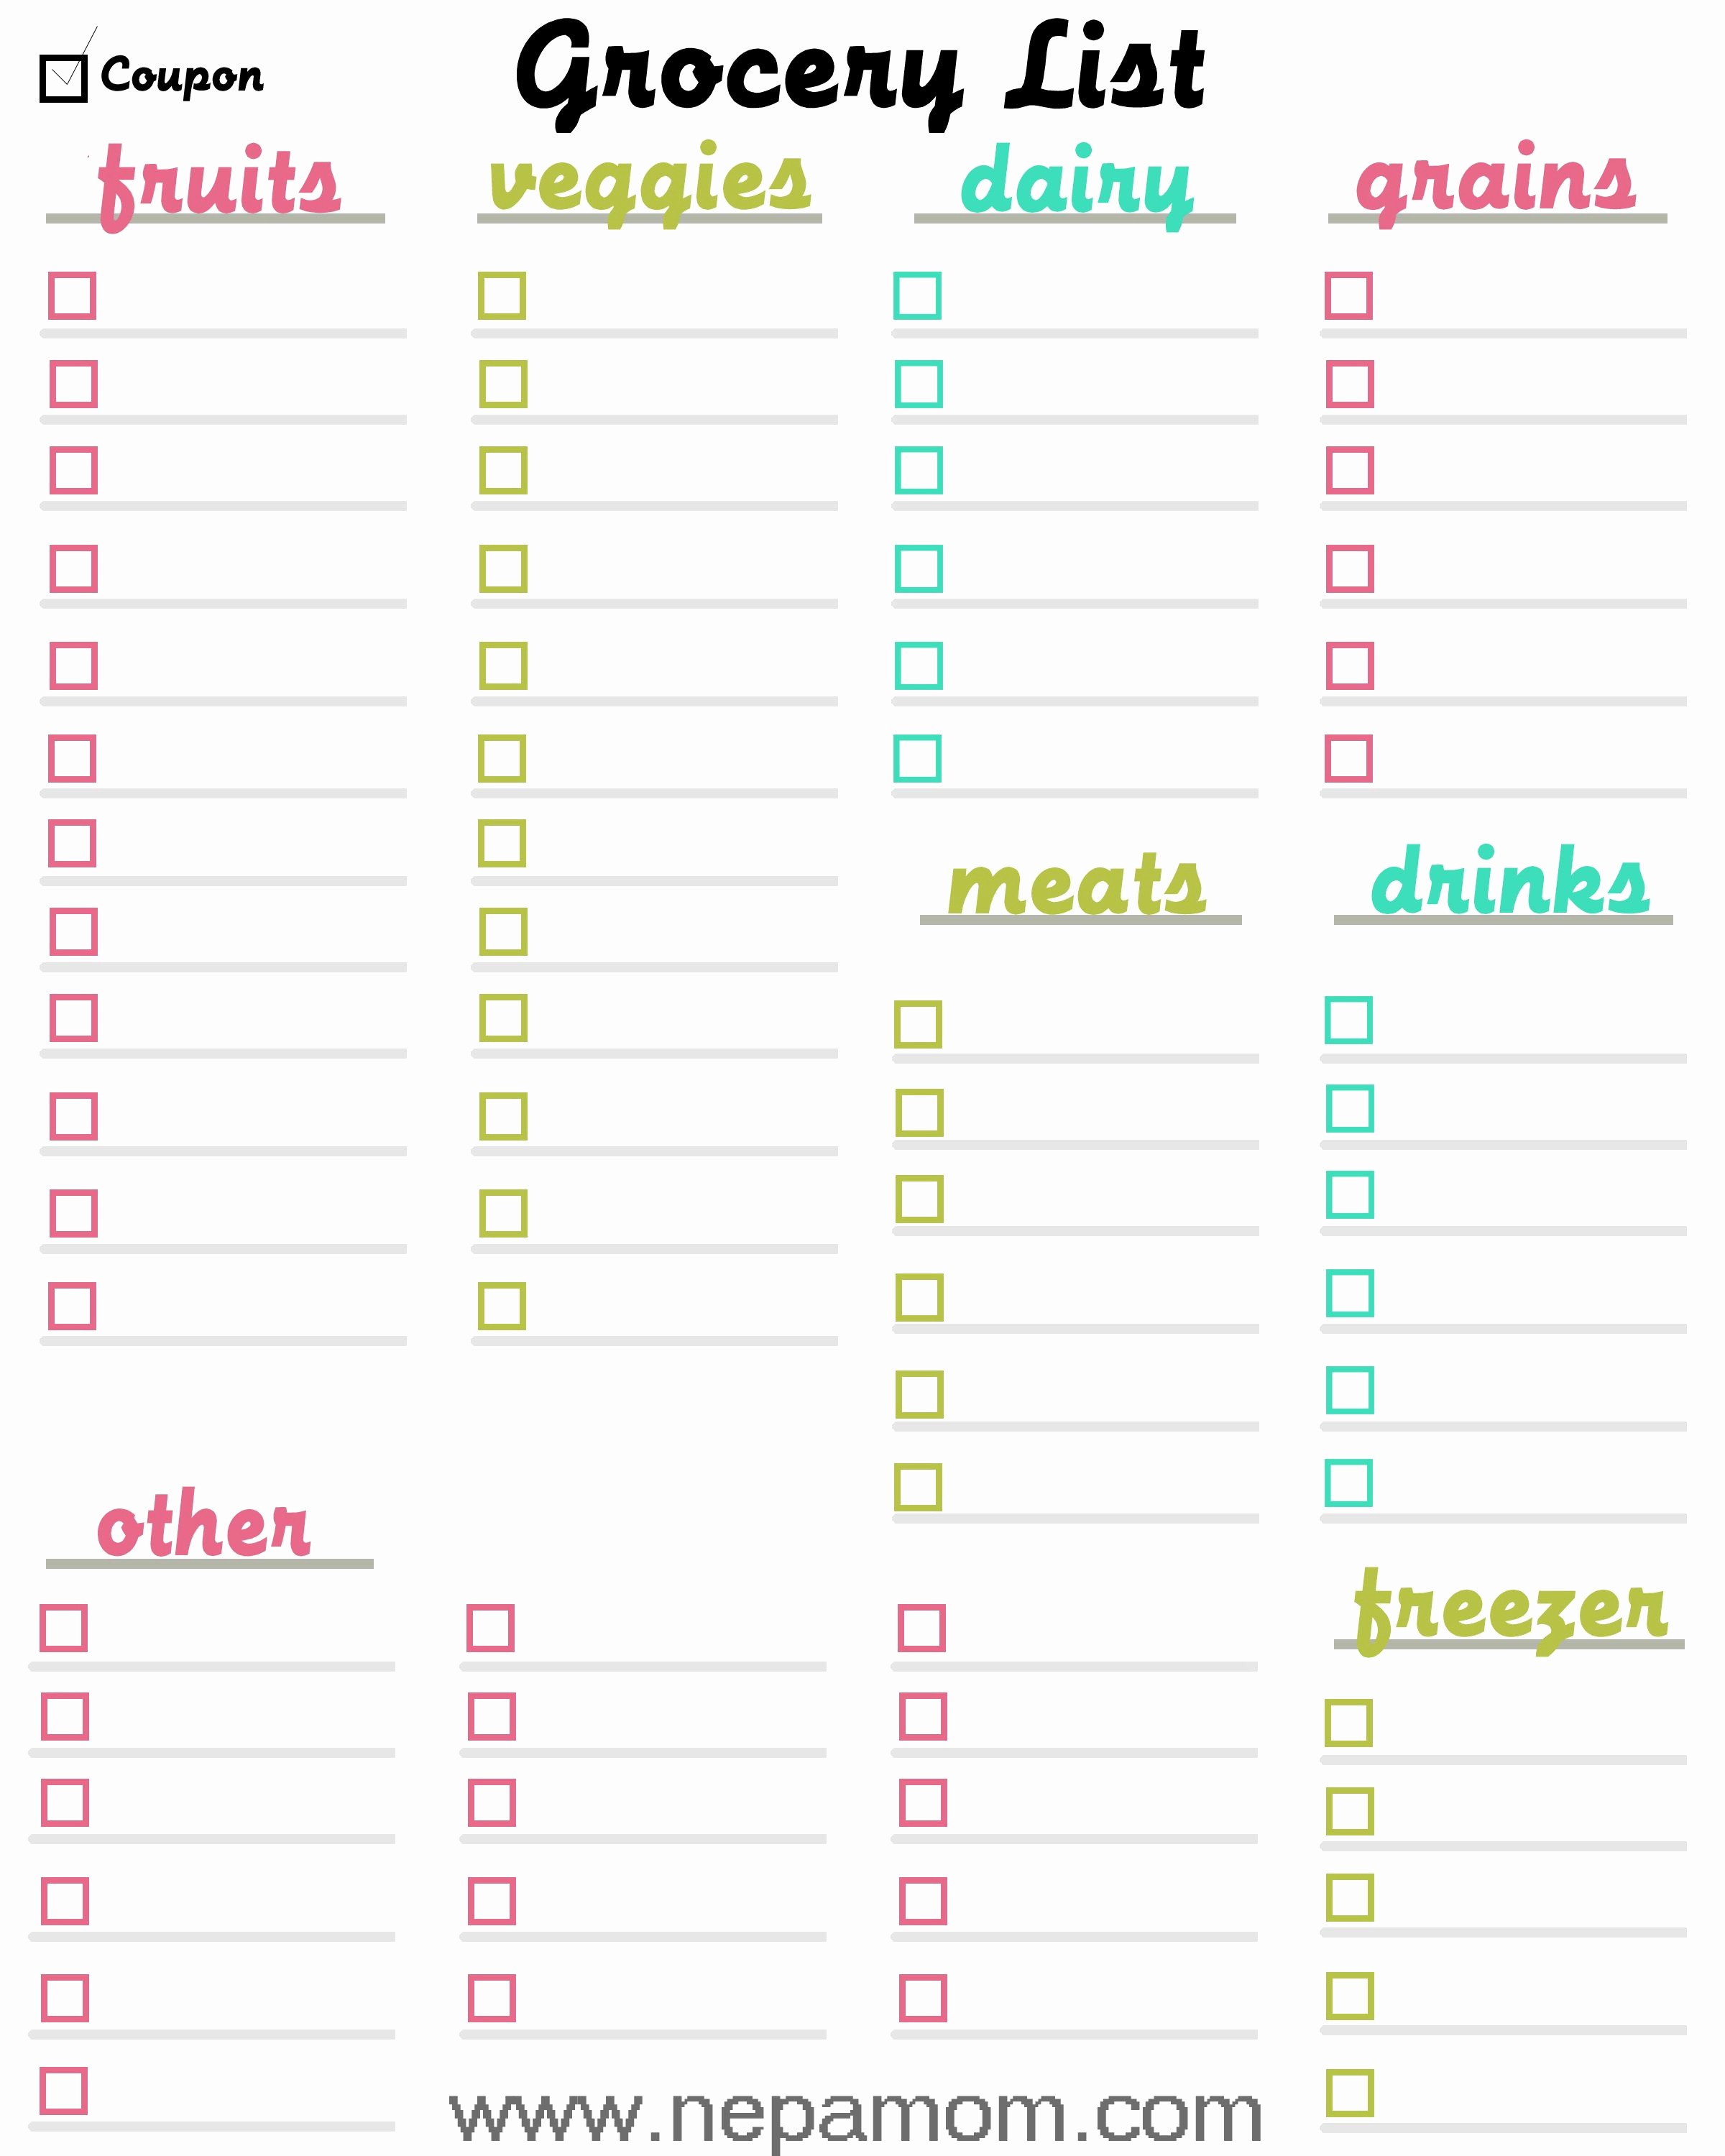 Grocery List by Aisle Template Fresh Grocery Shopping List Template Print This Template Out